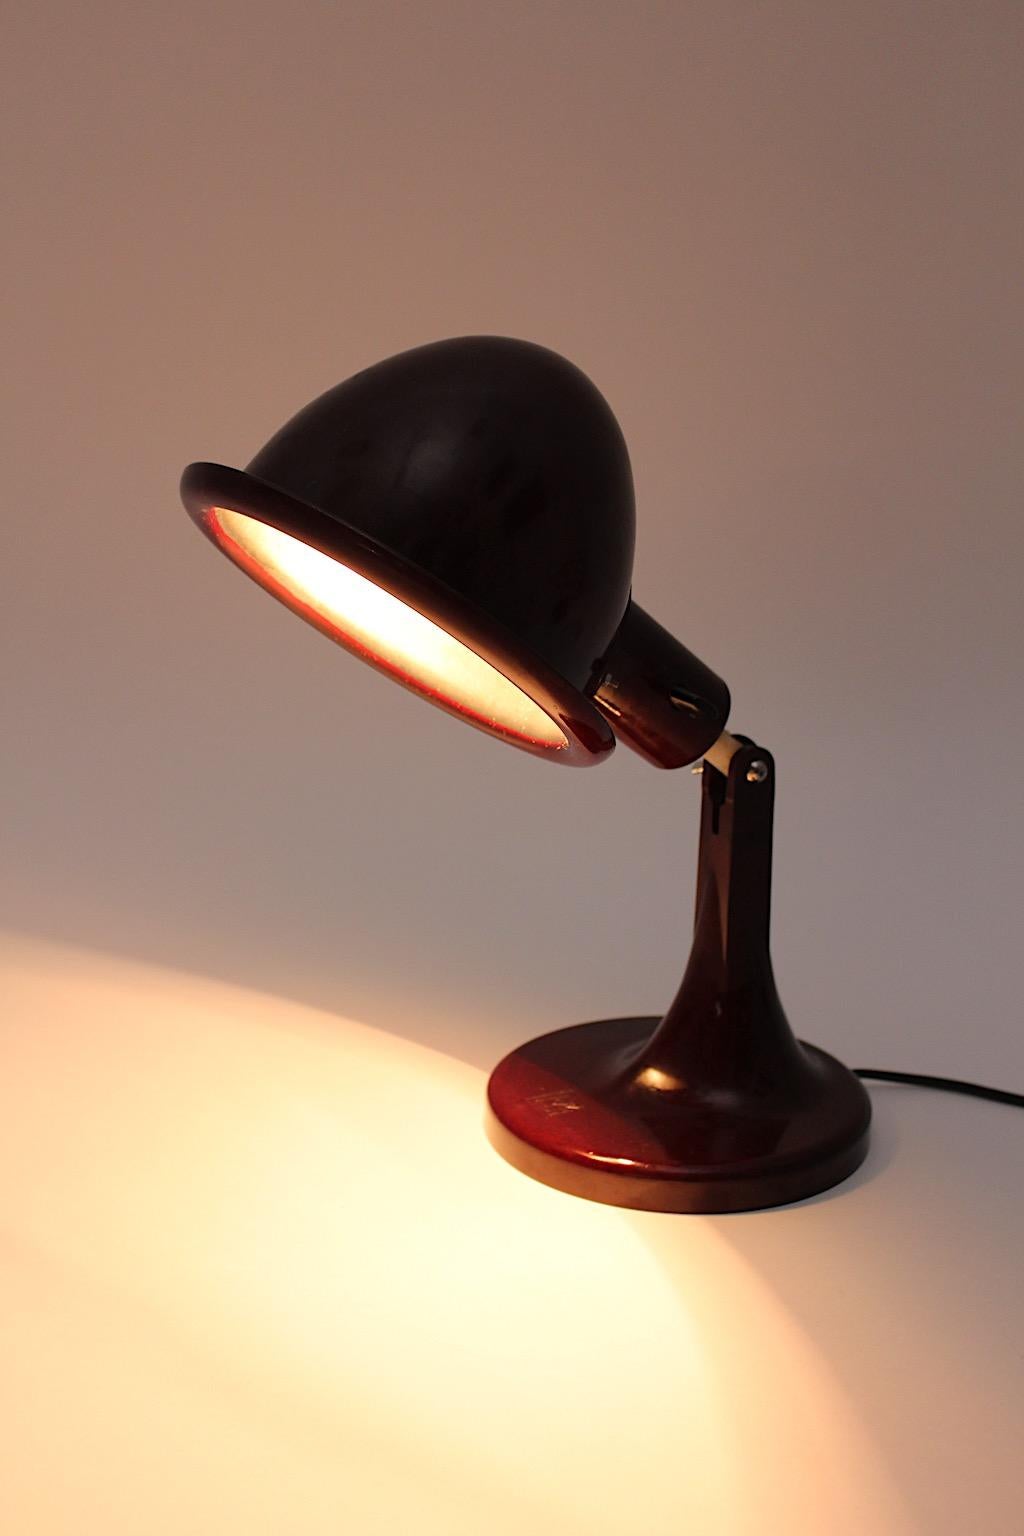 Early 20th Century Art Deco Vintage Red Bakelite Desk Lamp Table Lamp 1920s Germany For Sale